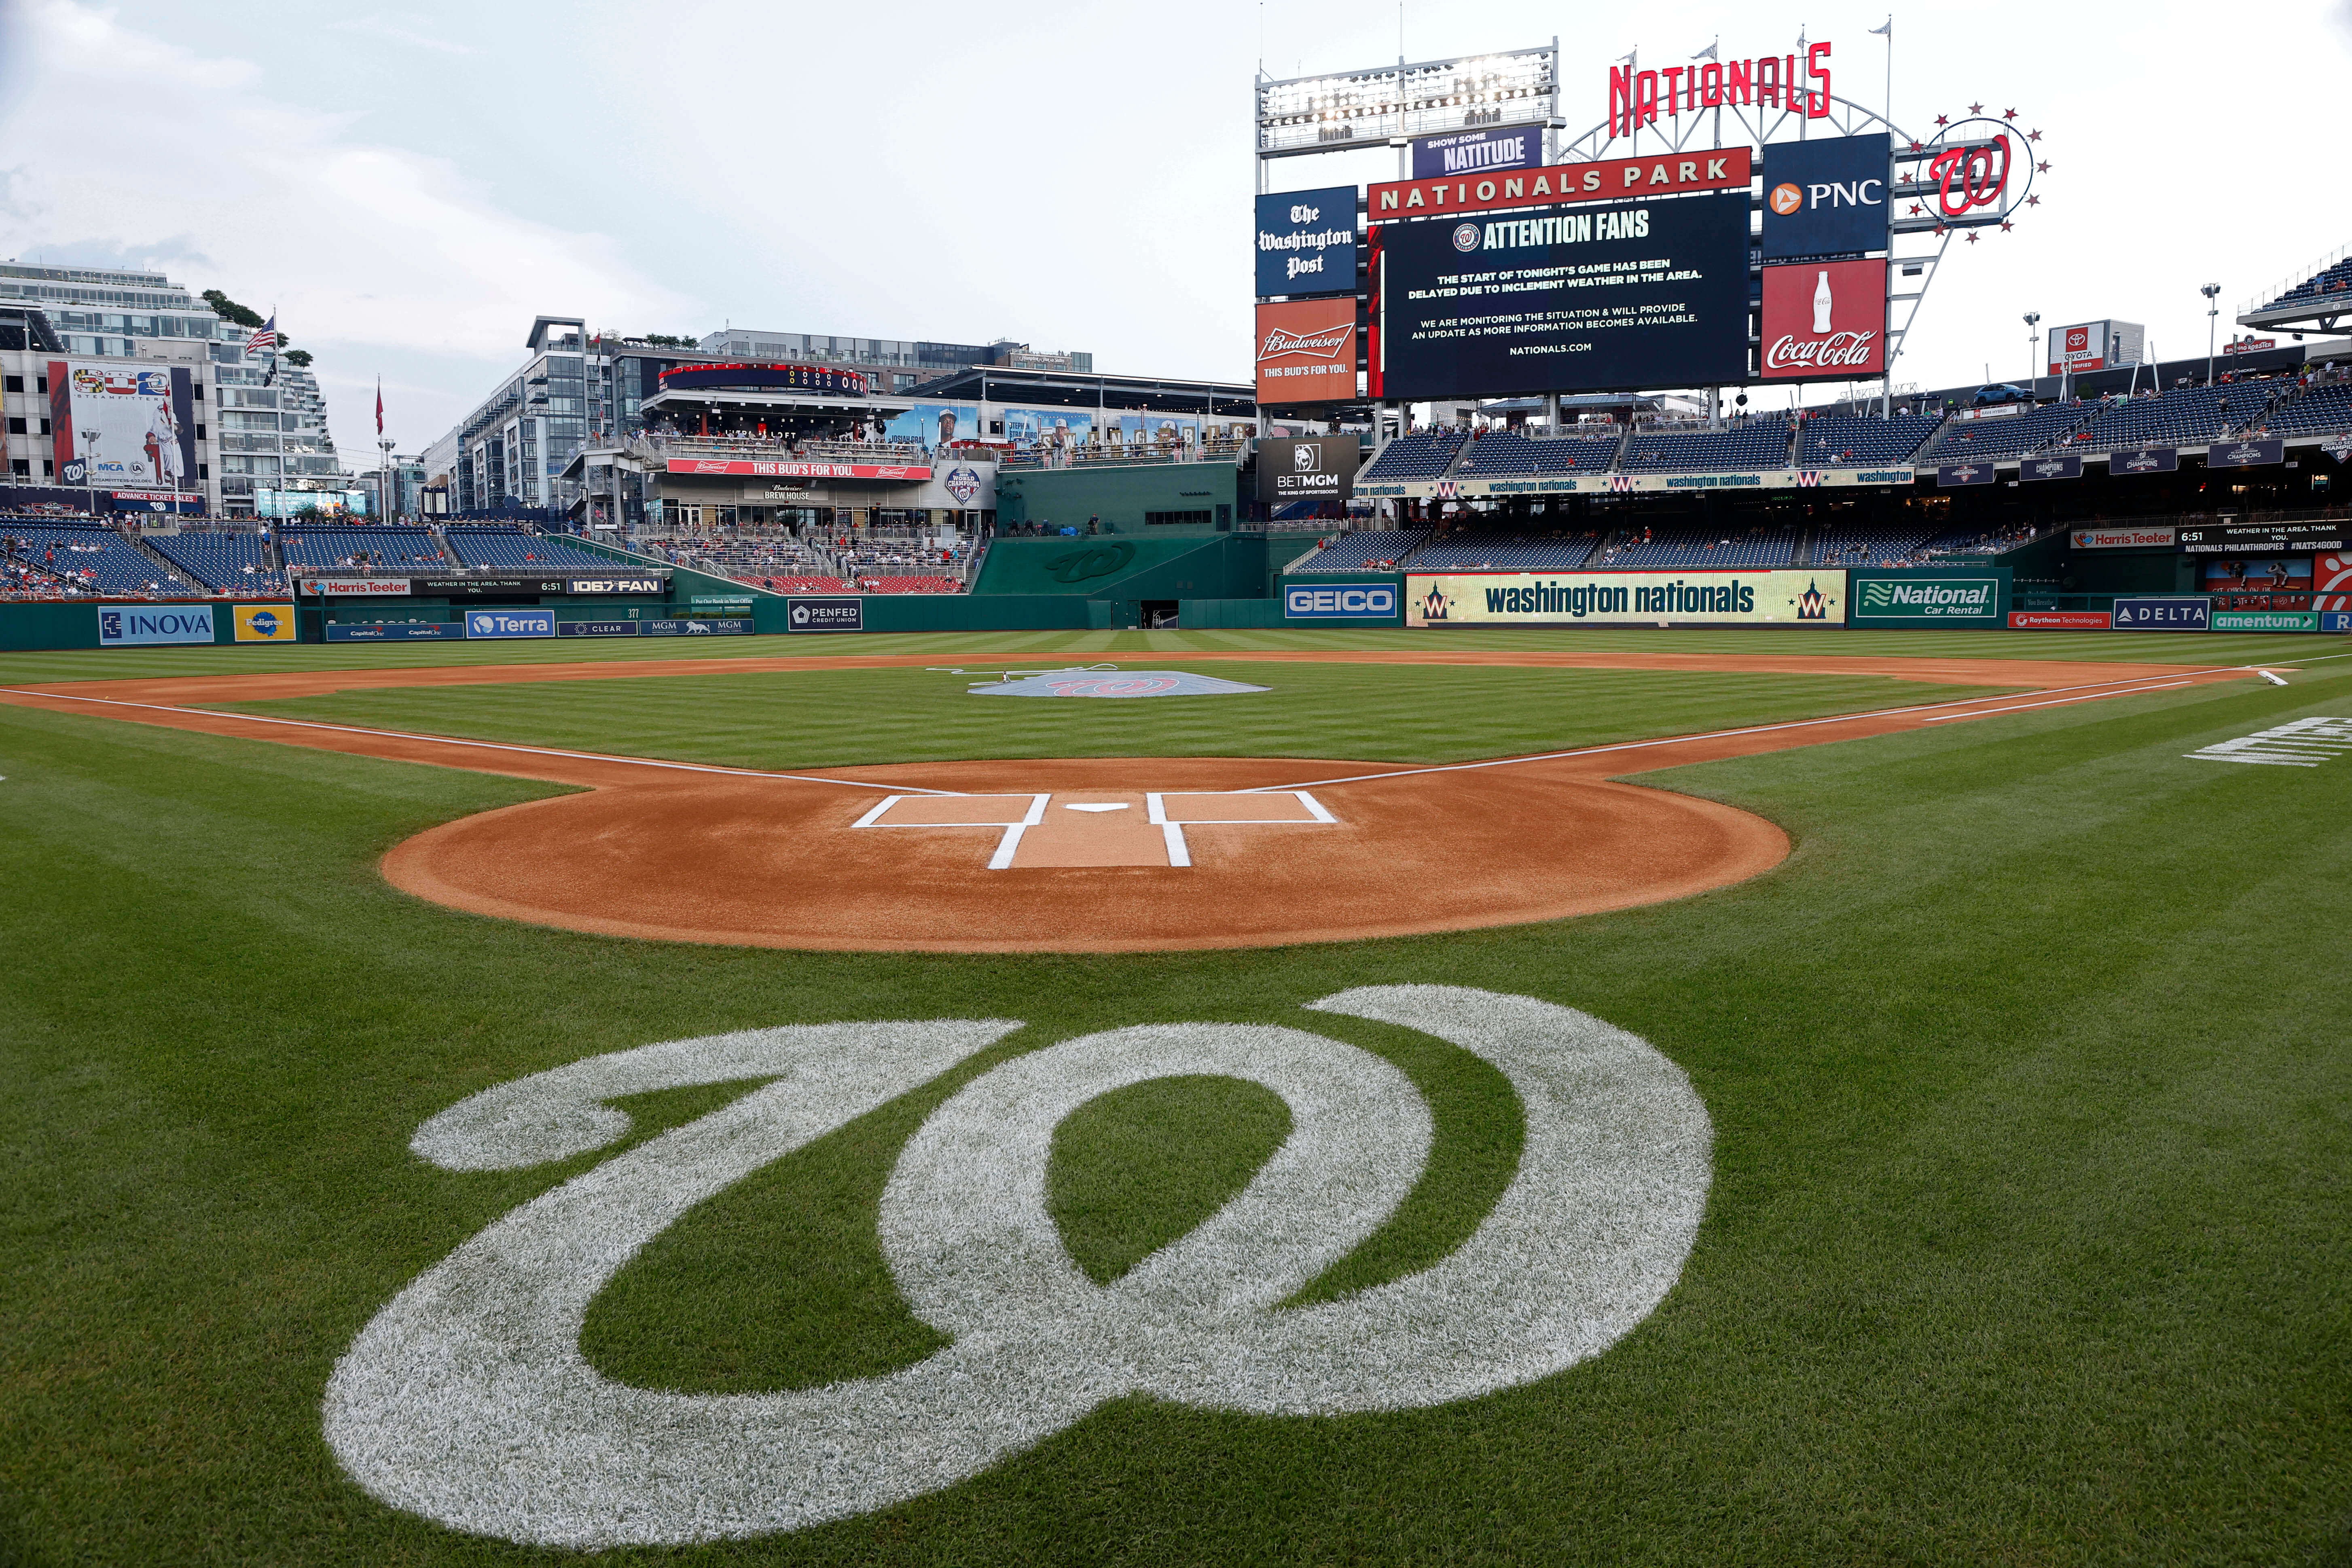 How To Bet - Expanded D.C. Sports Betting Structure Underscores New Market Realities